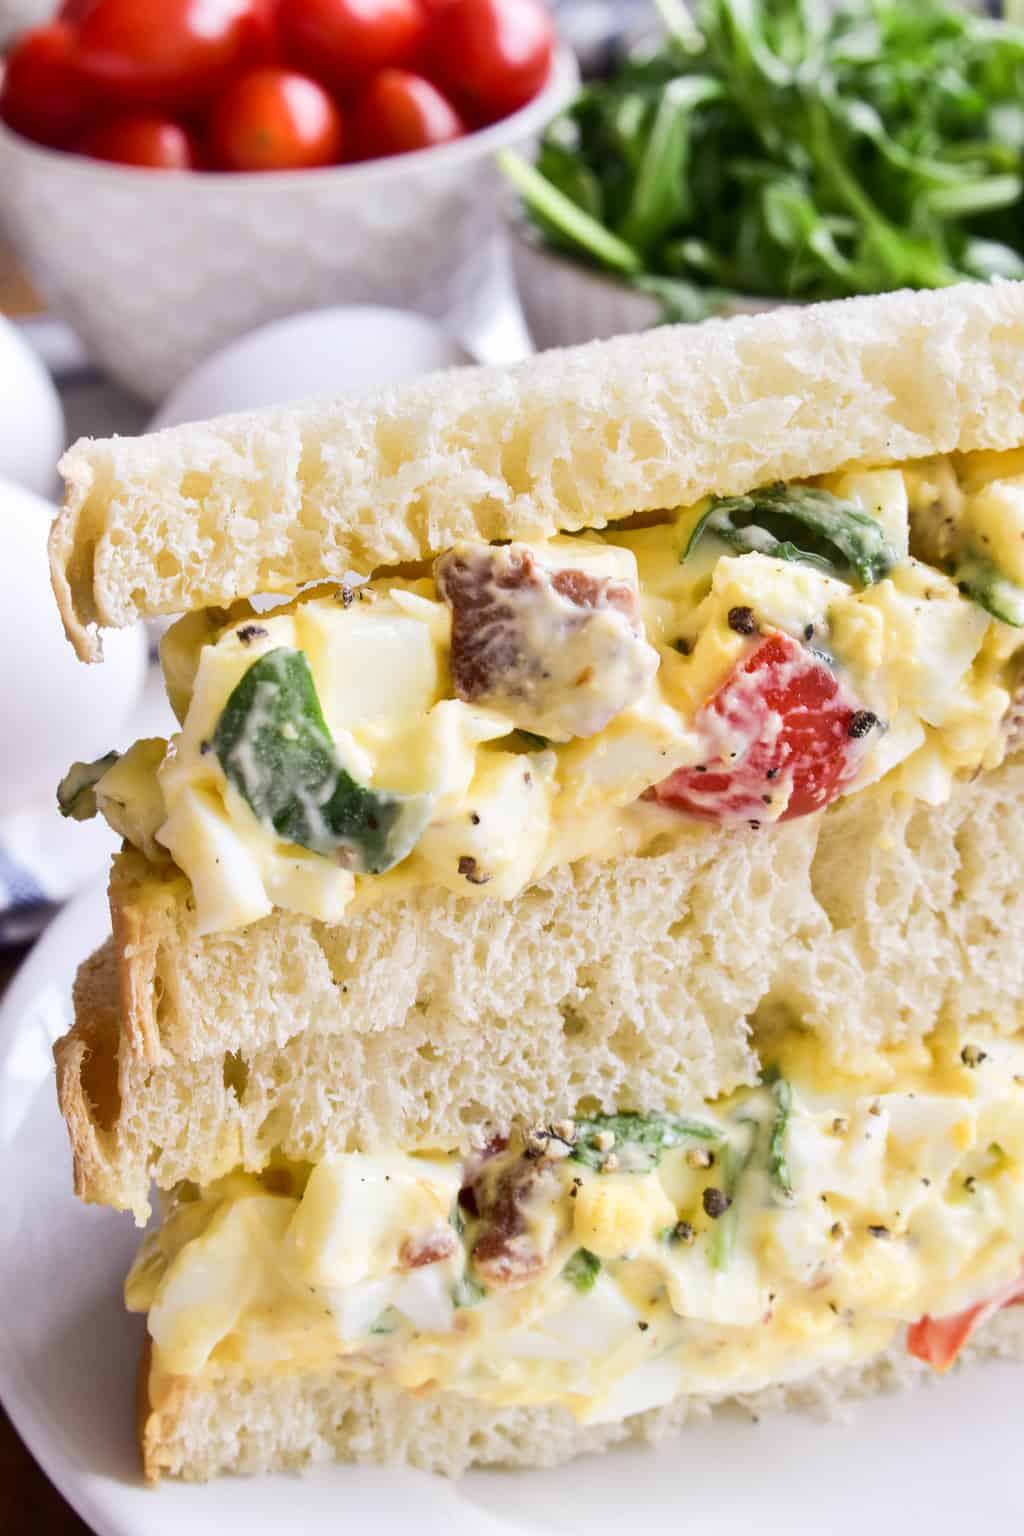 This BLT Egg Salad combines two classics in one delicious dish that's sure to become a new favorite! This egg salad has all the creamy deliciousness you expect from egg salad, plus the bold flavors of bacon, lettuce, and tomato. Perfect for weekday lunches and summer picnics, and a great way to use up leftover Easter eggs. If you love egg salad, you'll LOVE this yummy twist!